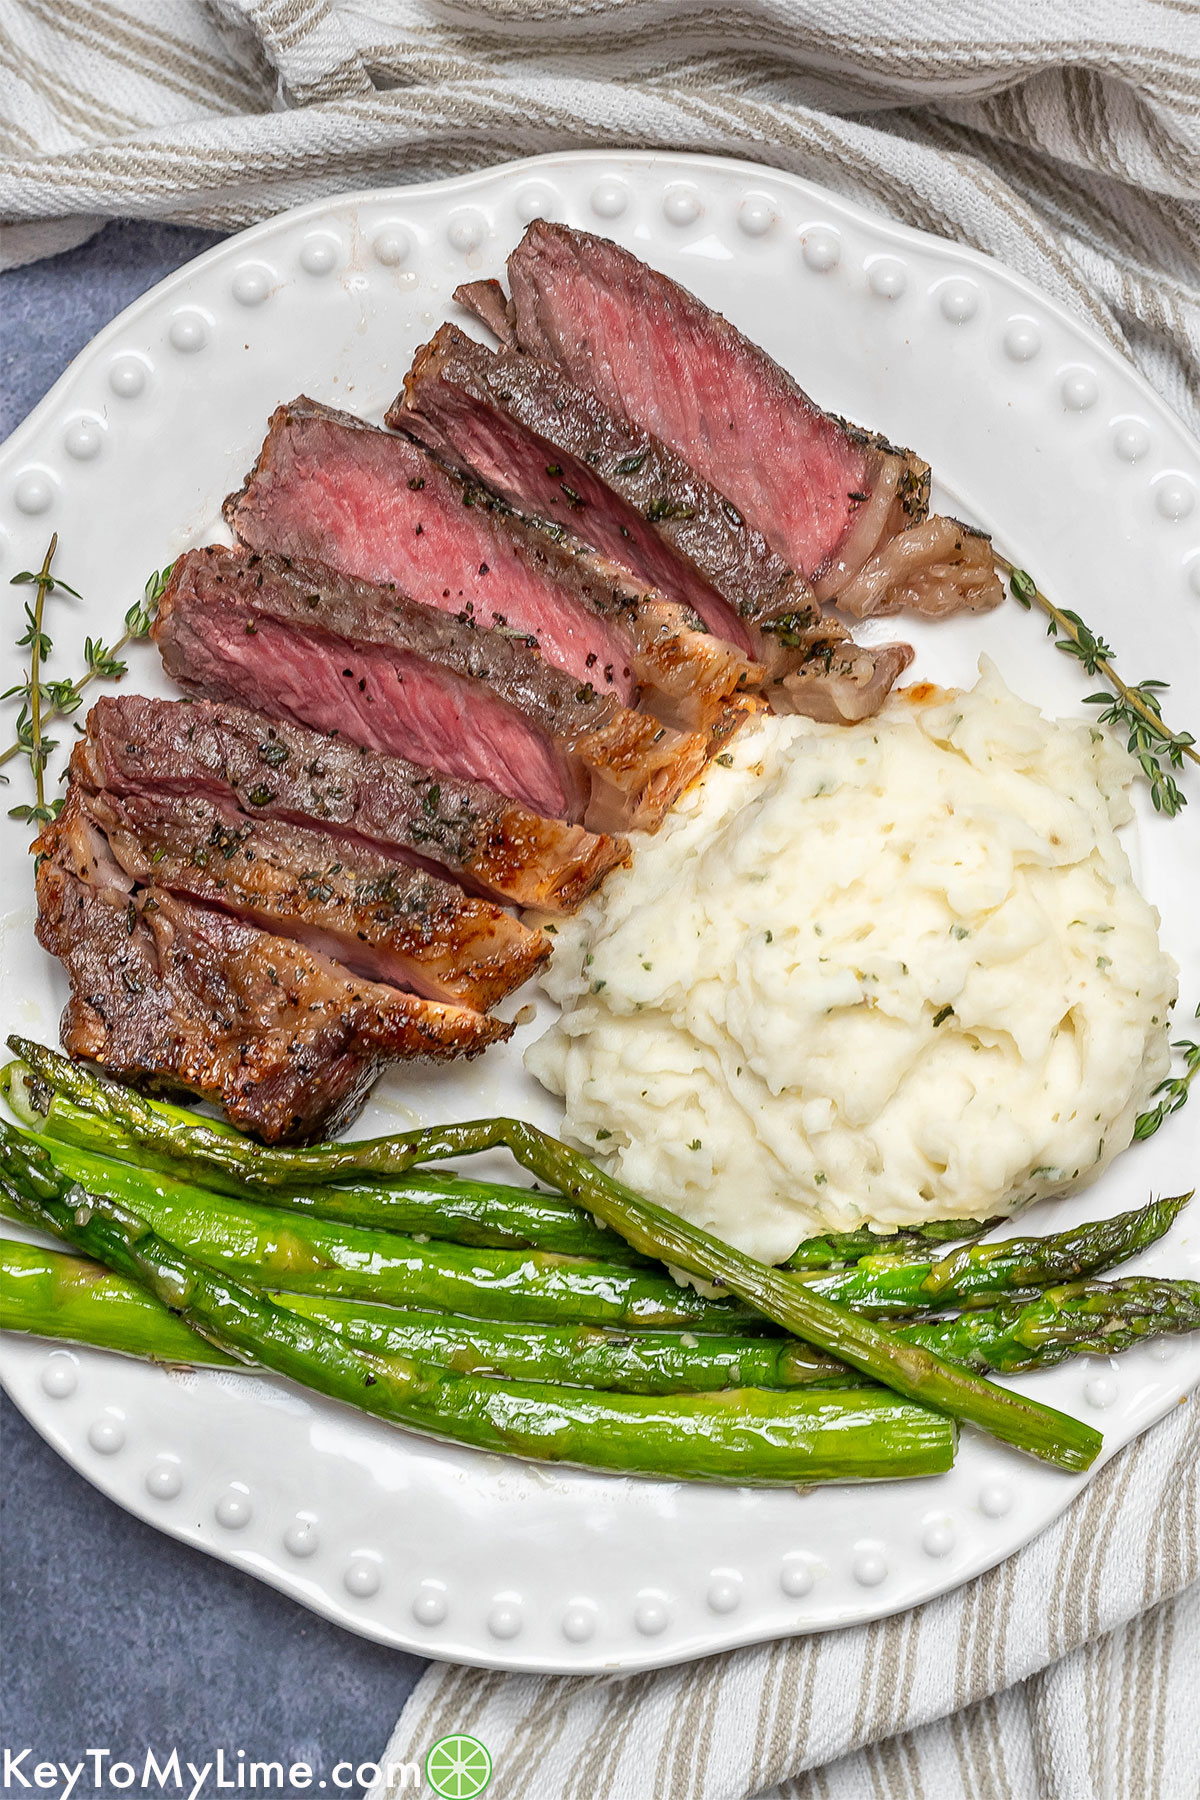 A white dinner plate with freshly sliced steak, mashed potatoes, and asparagus.